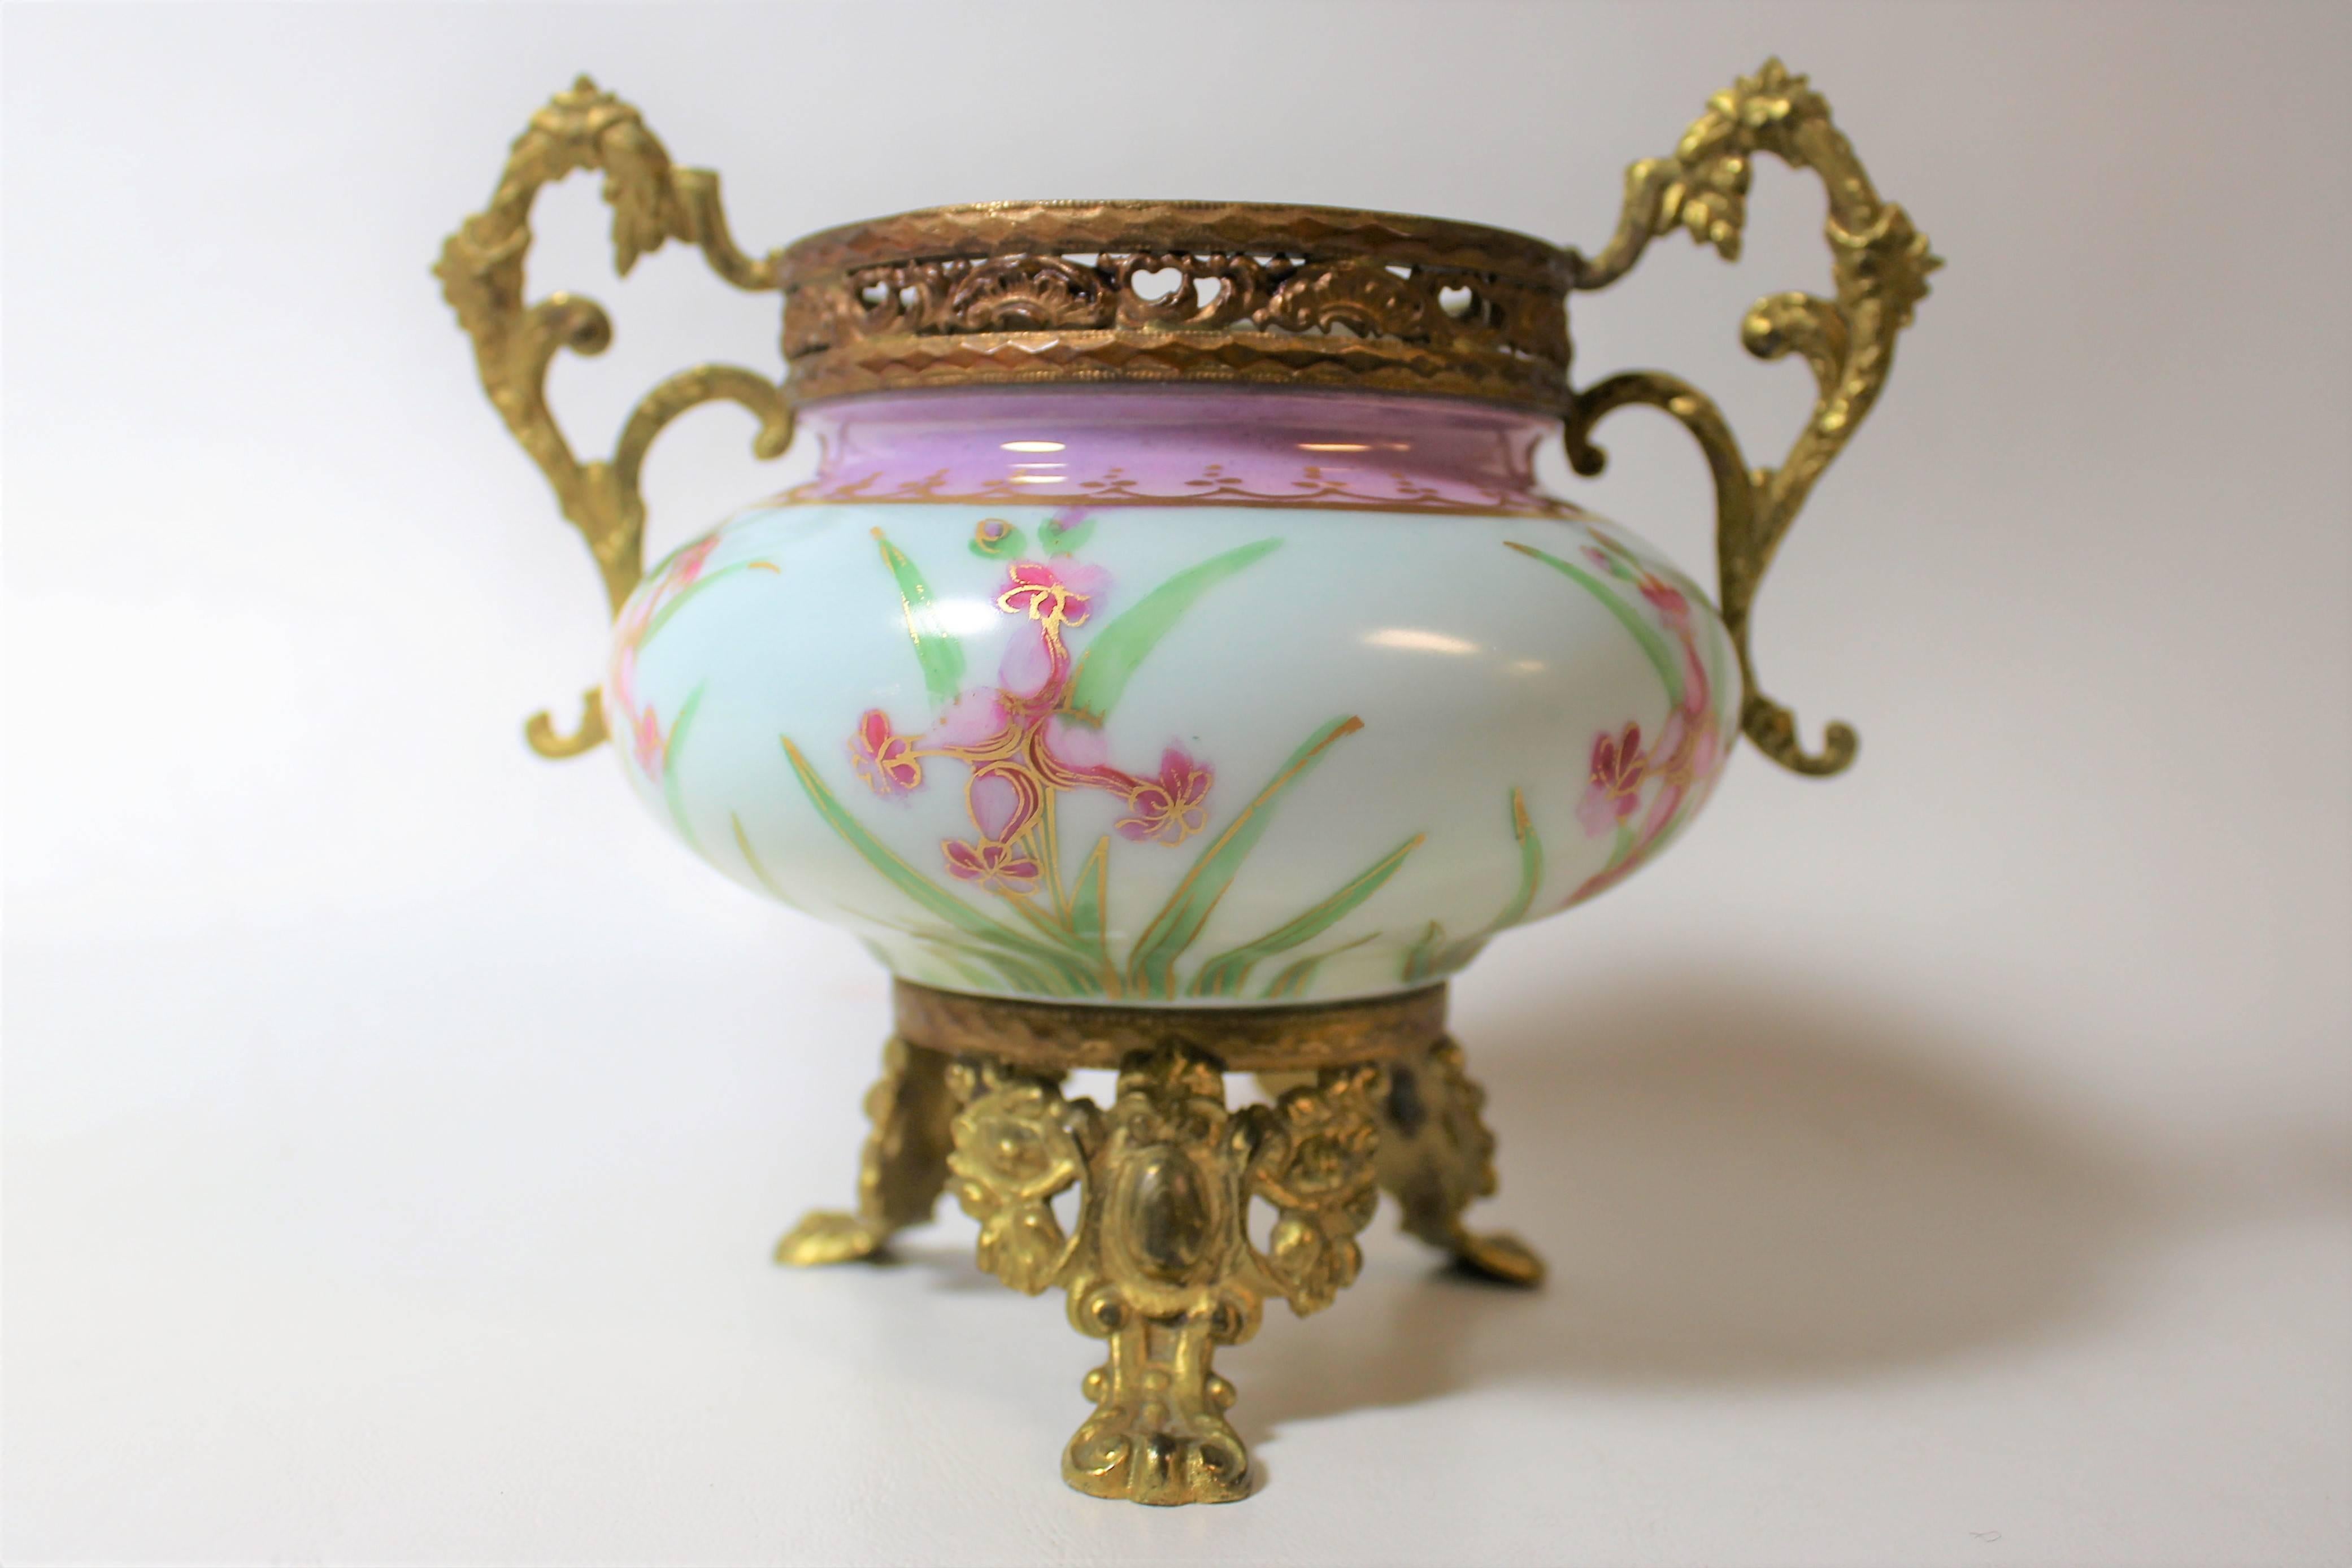 Art Nouveau French Porcelain Ormolu-Mounted Urn In Good Condition For Sale In Hamilton, Ontario